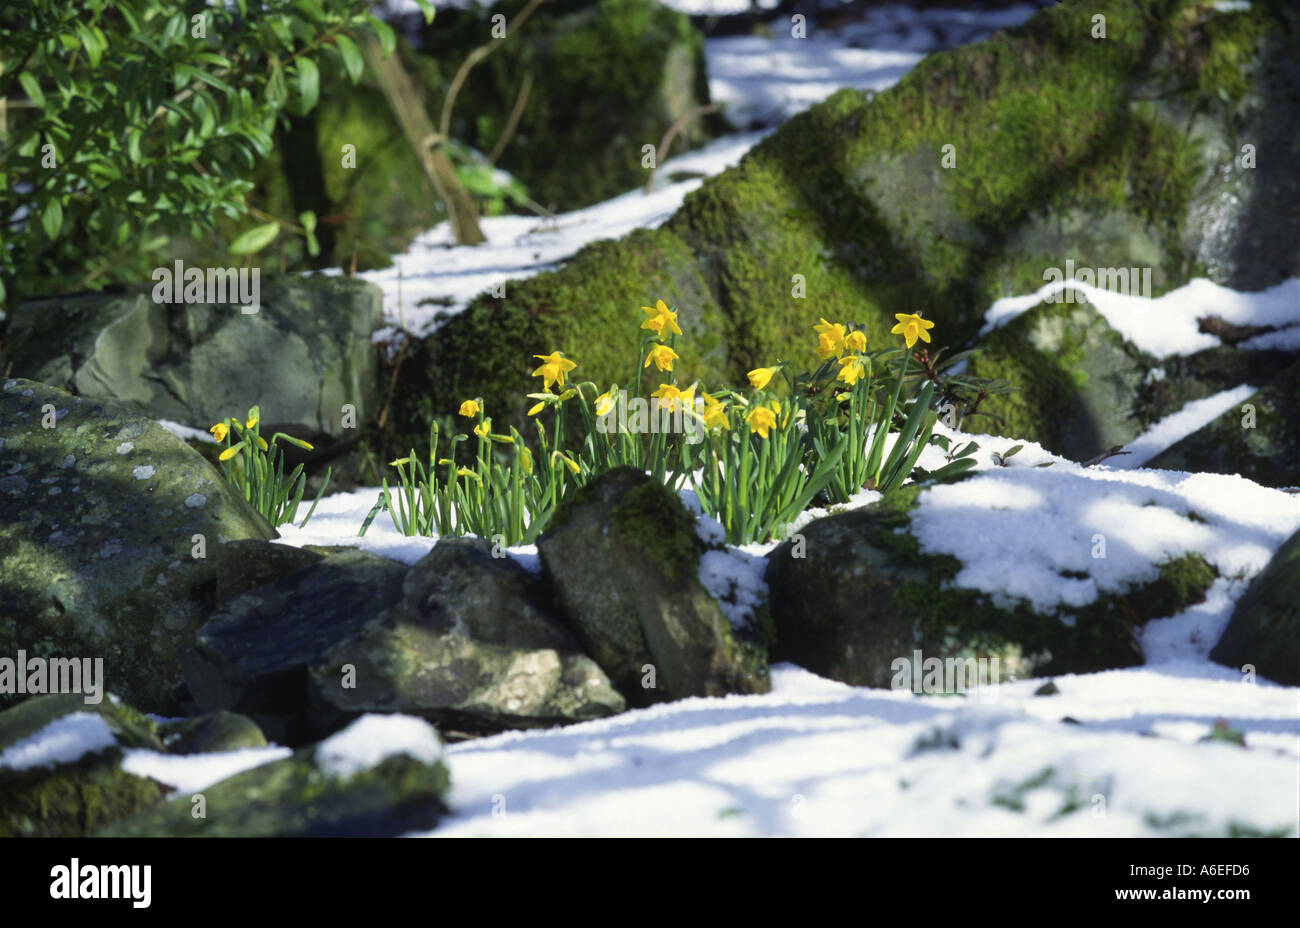 Daffodils naturalised in large rockery Stock Photo